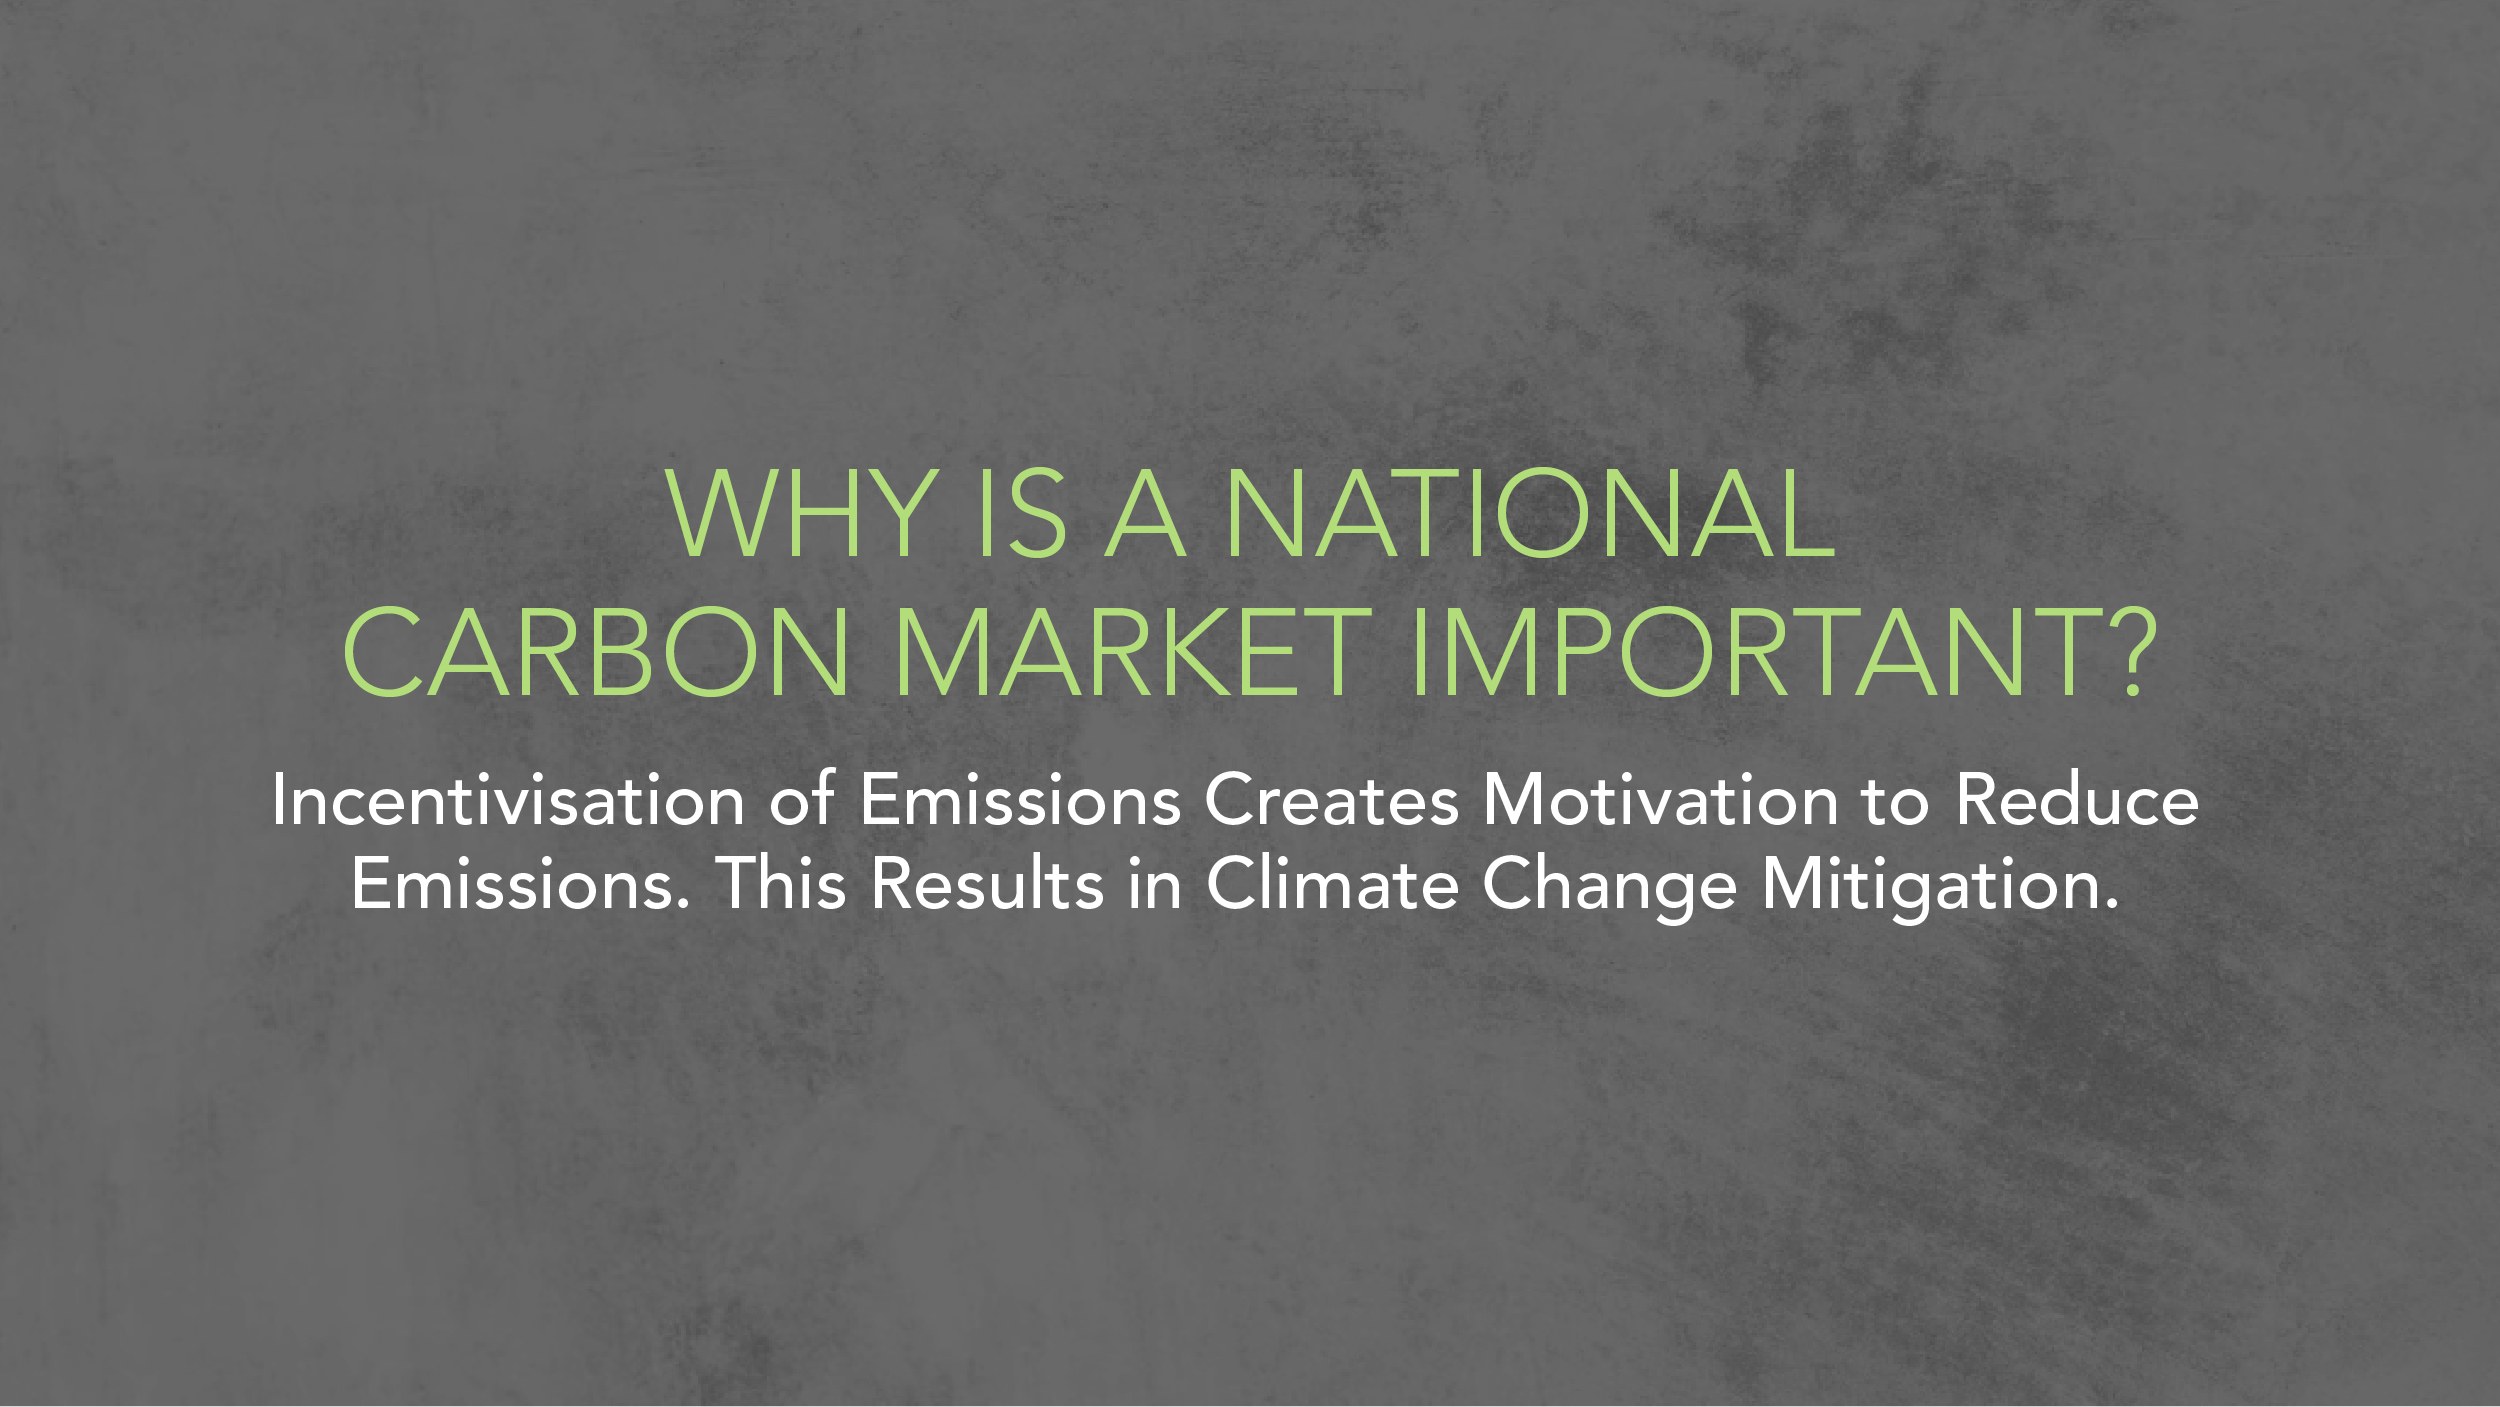 Why is a National Carbon Market Important